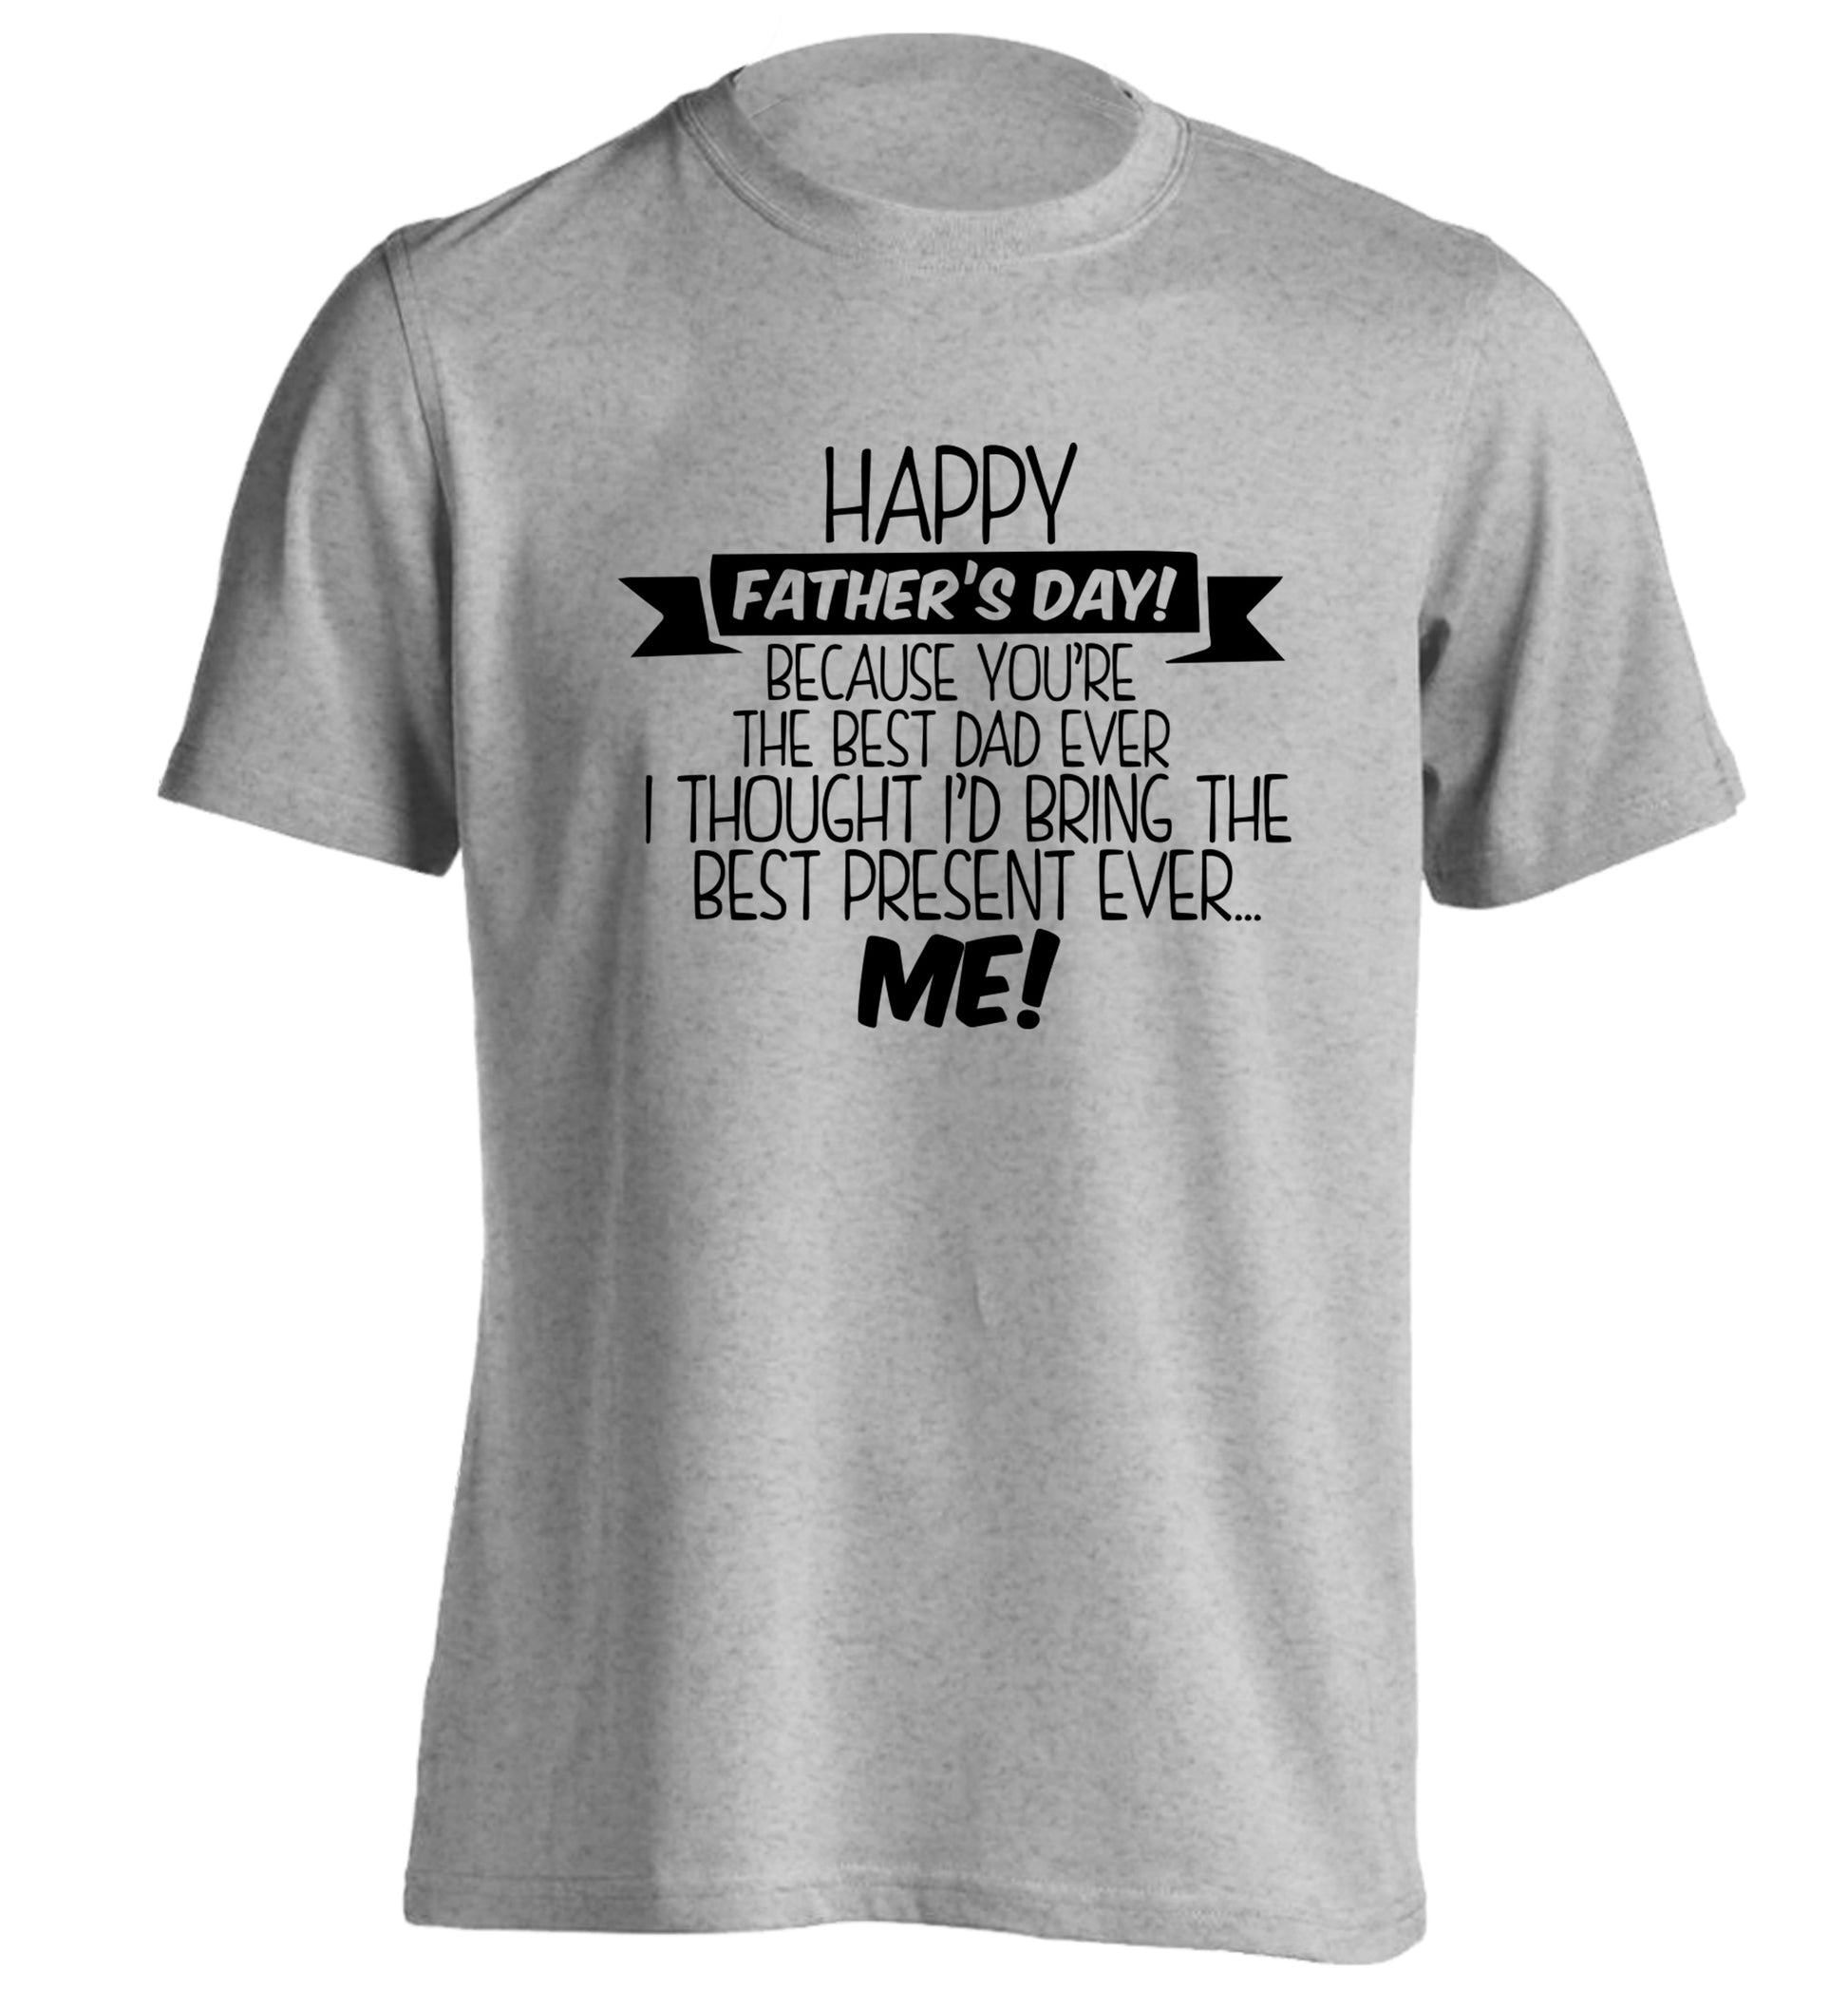 Happy Father's day, because you're the best dad ever I thought I'd bring the best present ever...me! adults unisex grey Tshirt 2XL